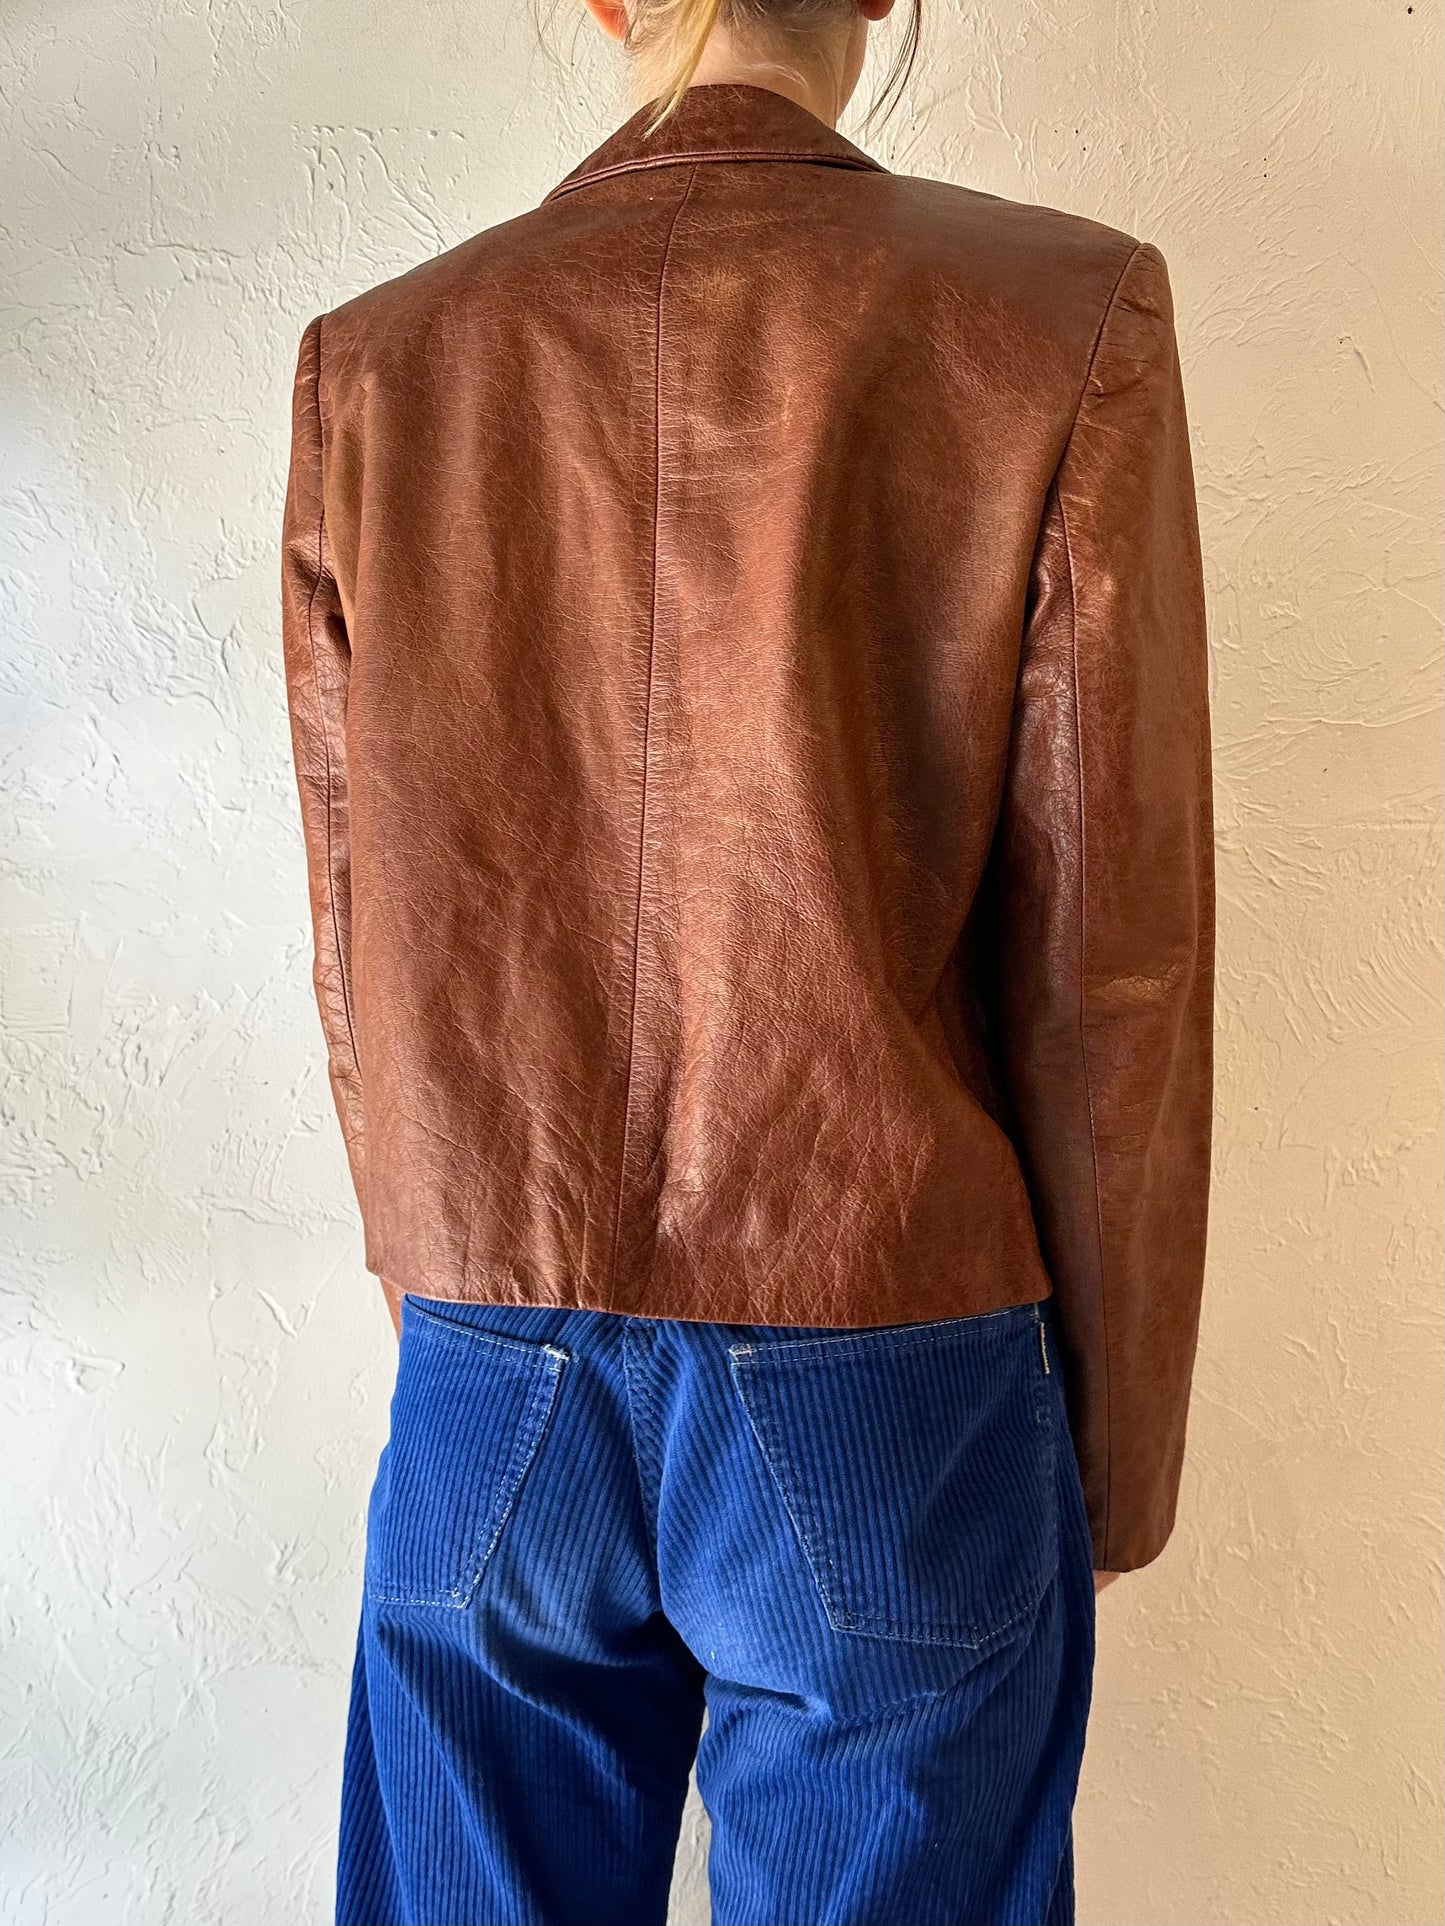 90s 'Michael Kors' Brown Leather Jacket / Small